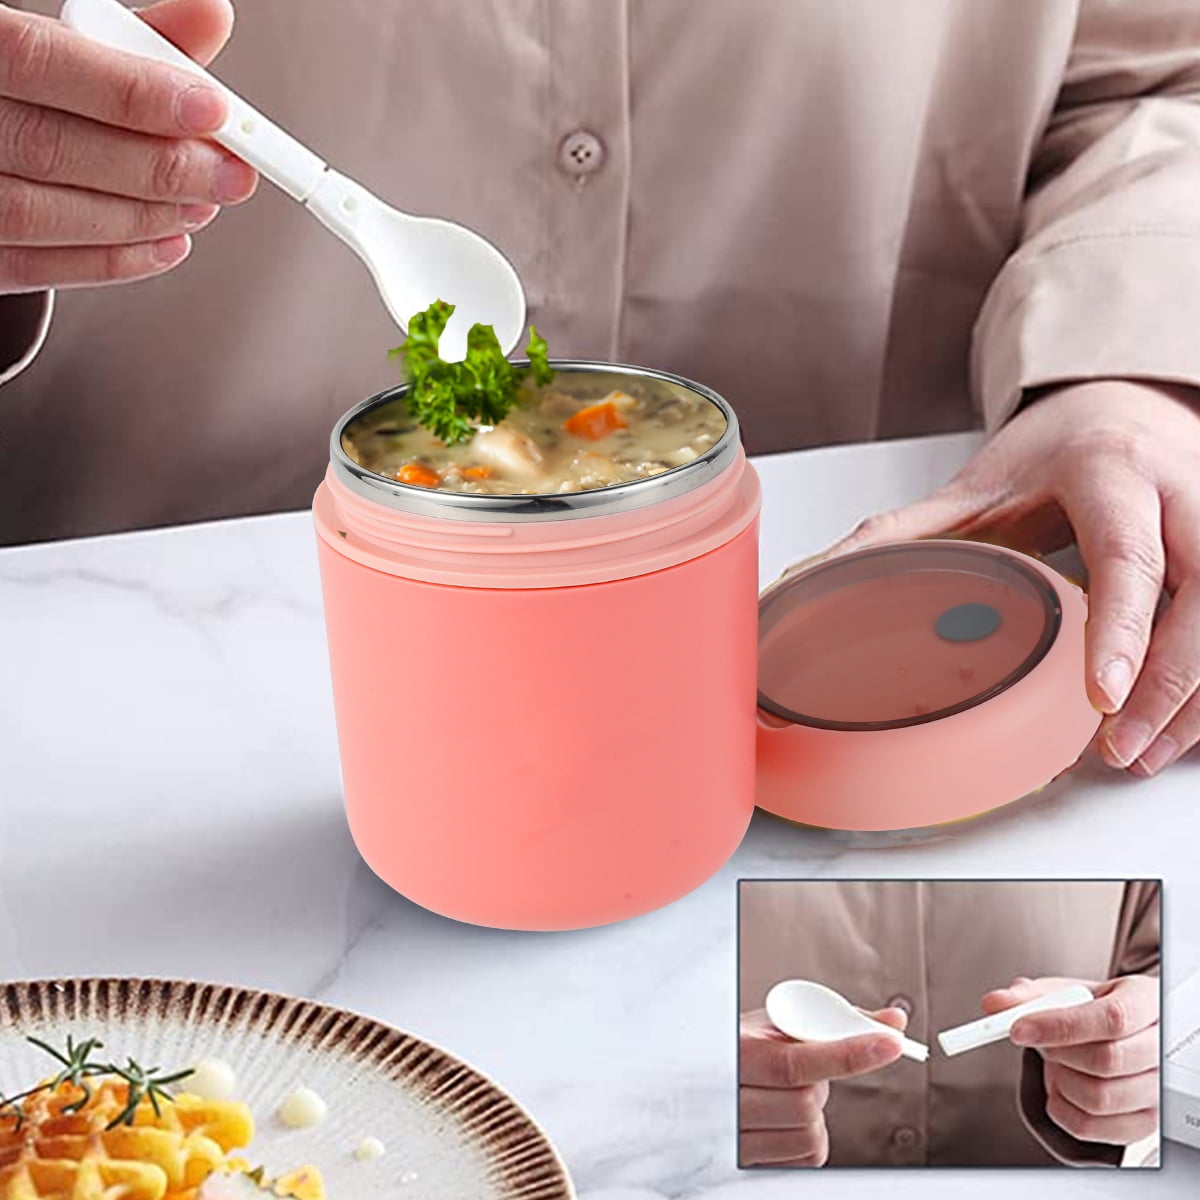 Nyidpsz Lunch Container Hot Food Jar with Foldable Spoon Thermal Insulated Soup Container for Kids Adult, Men's, Size: 9, Pink